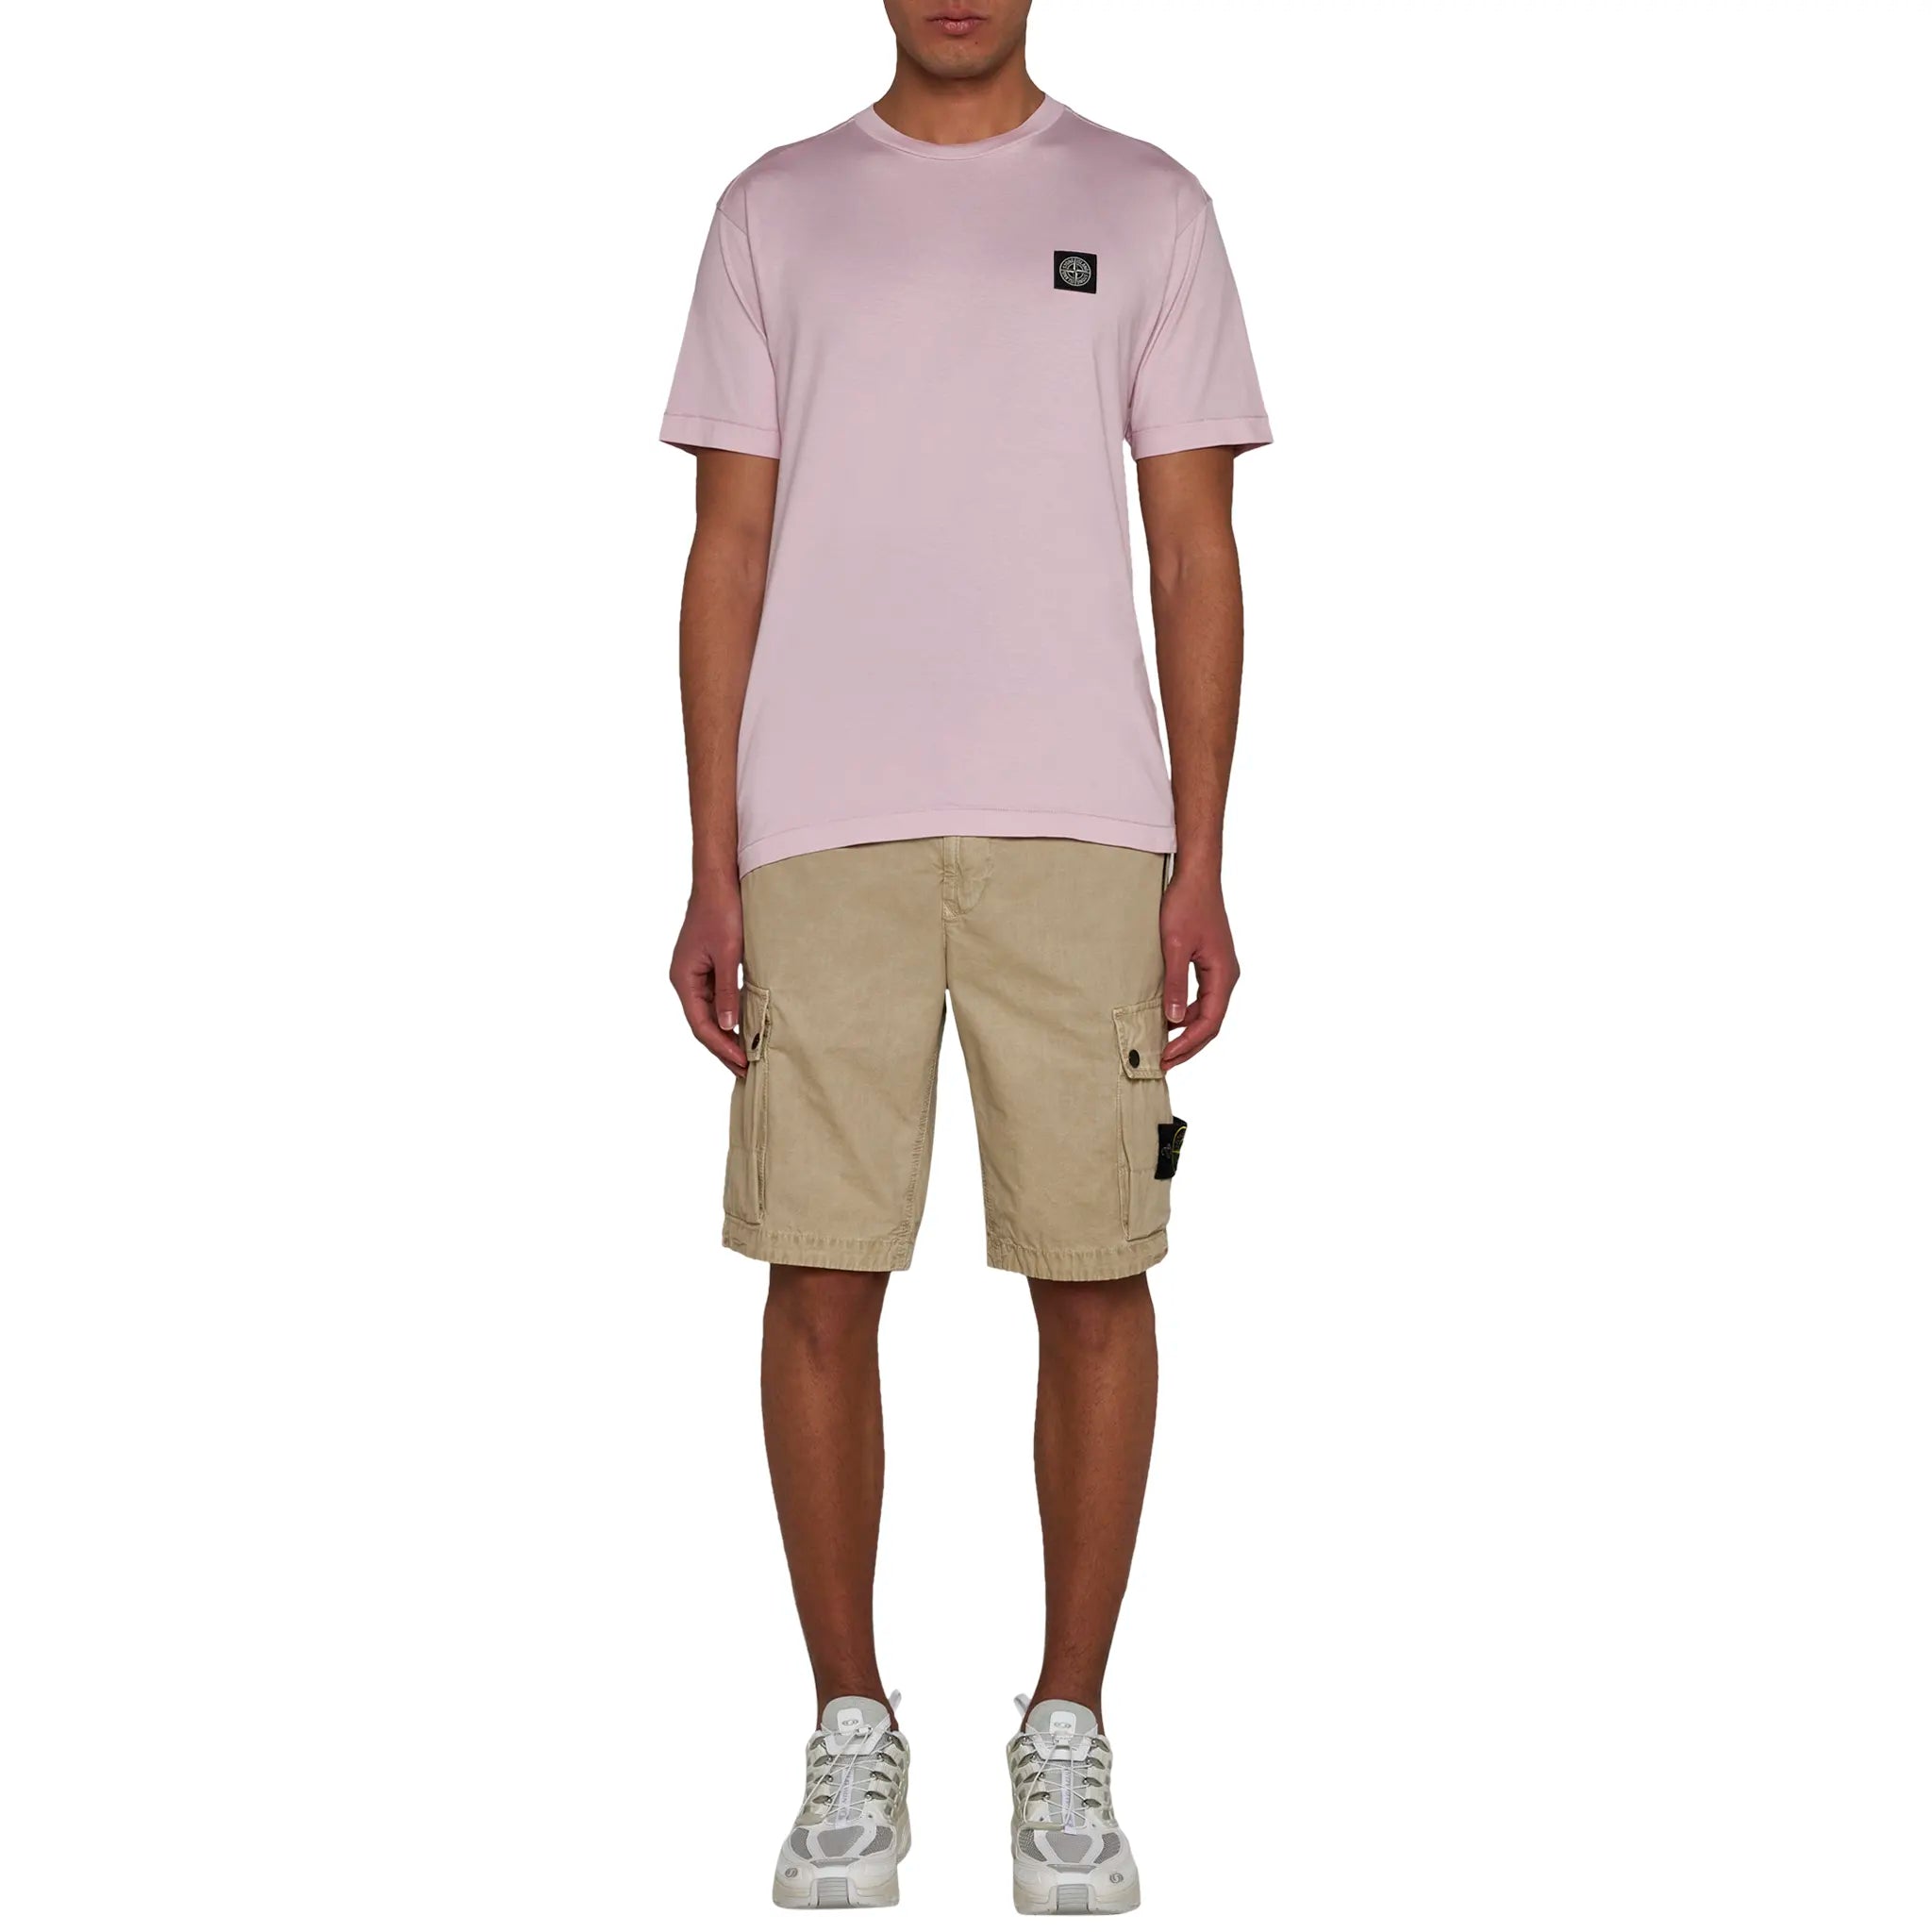 Model view of Stone Island Patch Logo Pink T Shirt 801524113